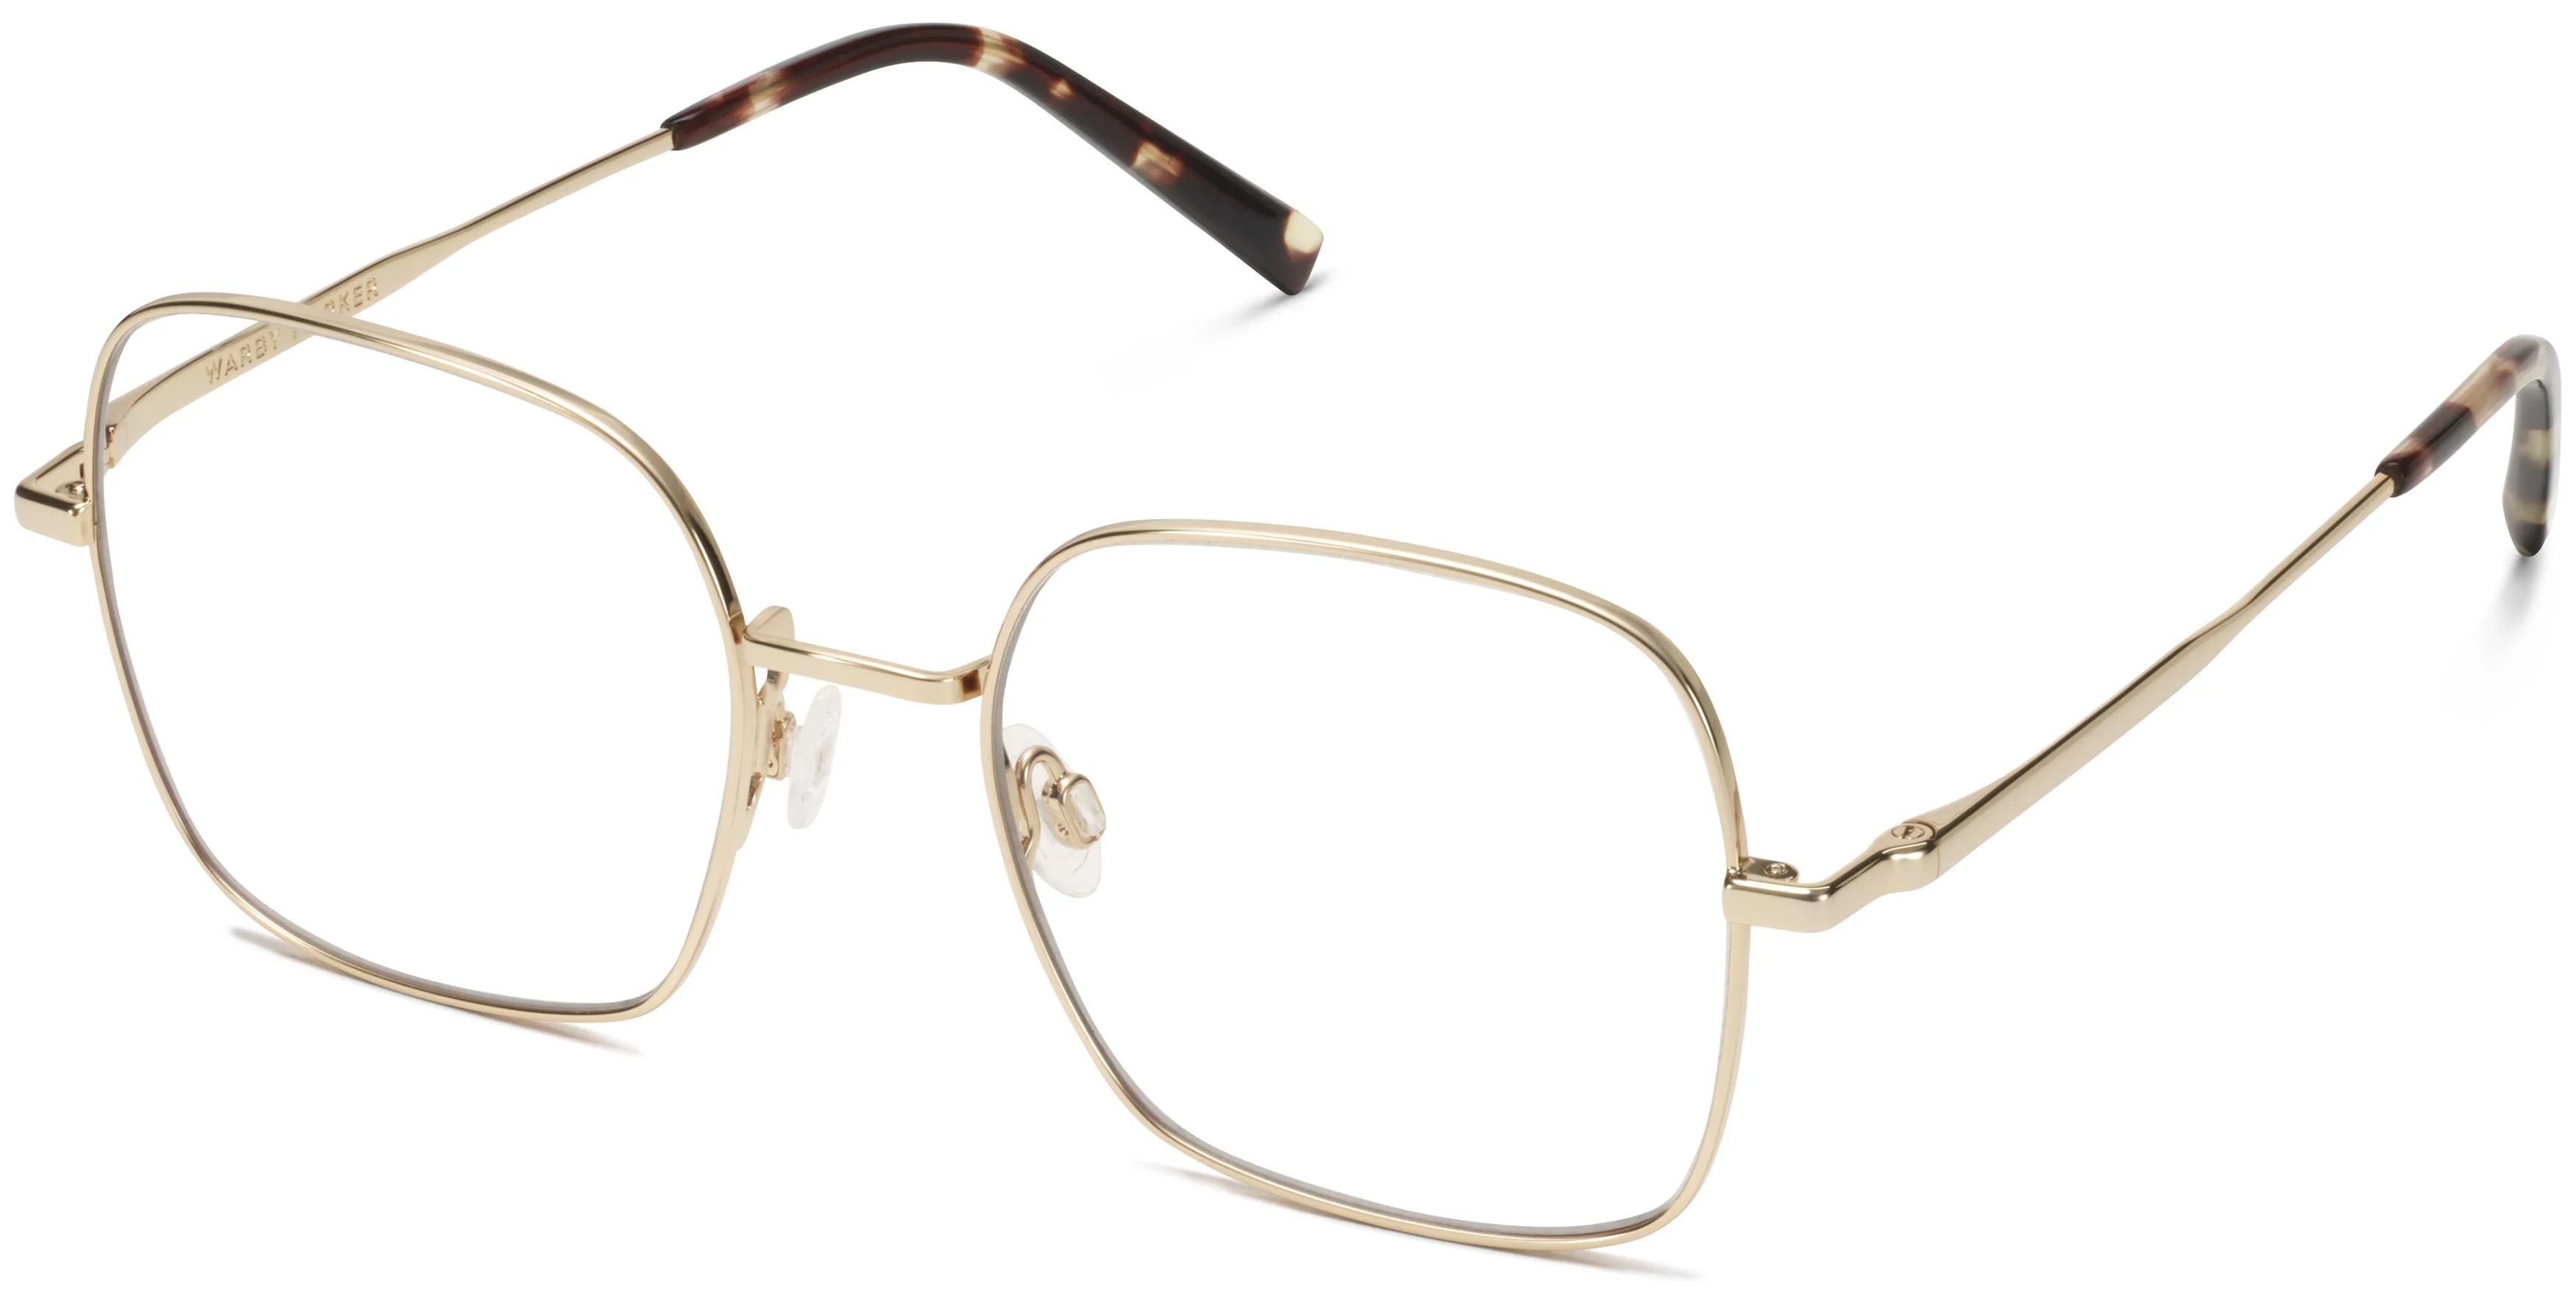 Aniyah Eyeglasses in Polished Gold | Warby Parker | Warby Parker (US)